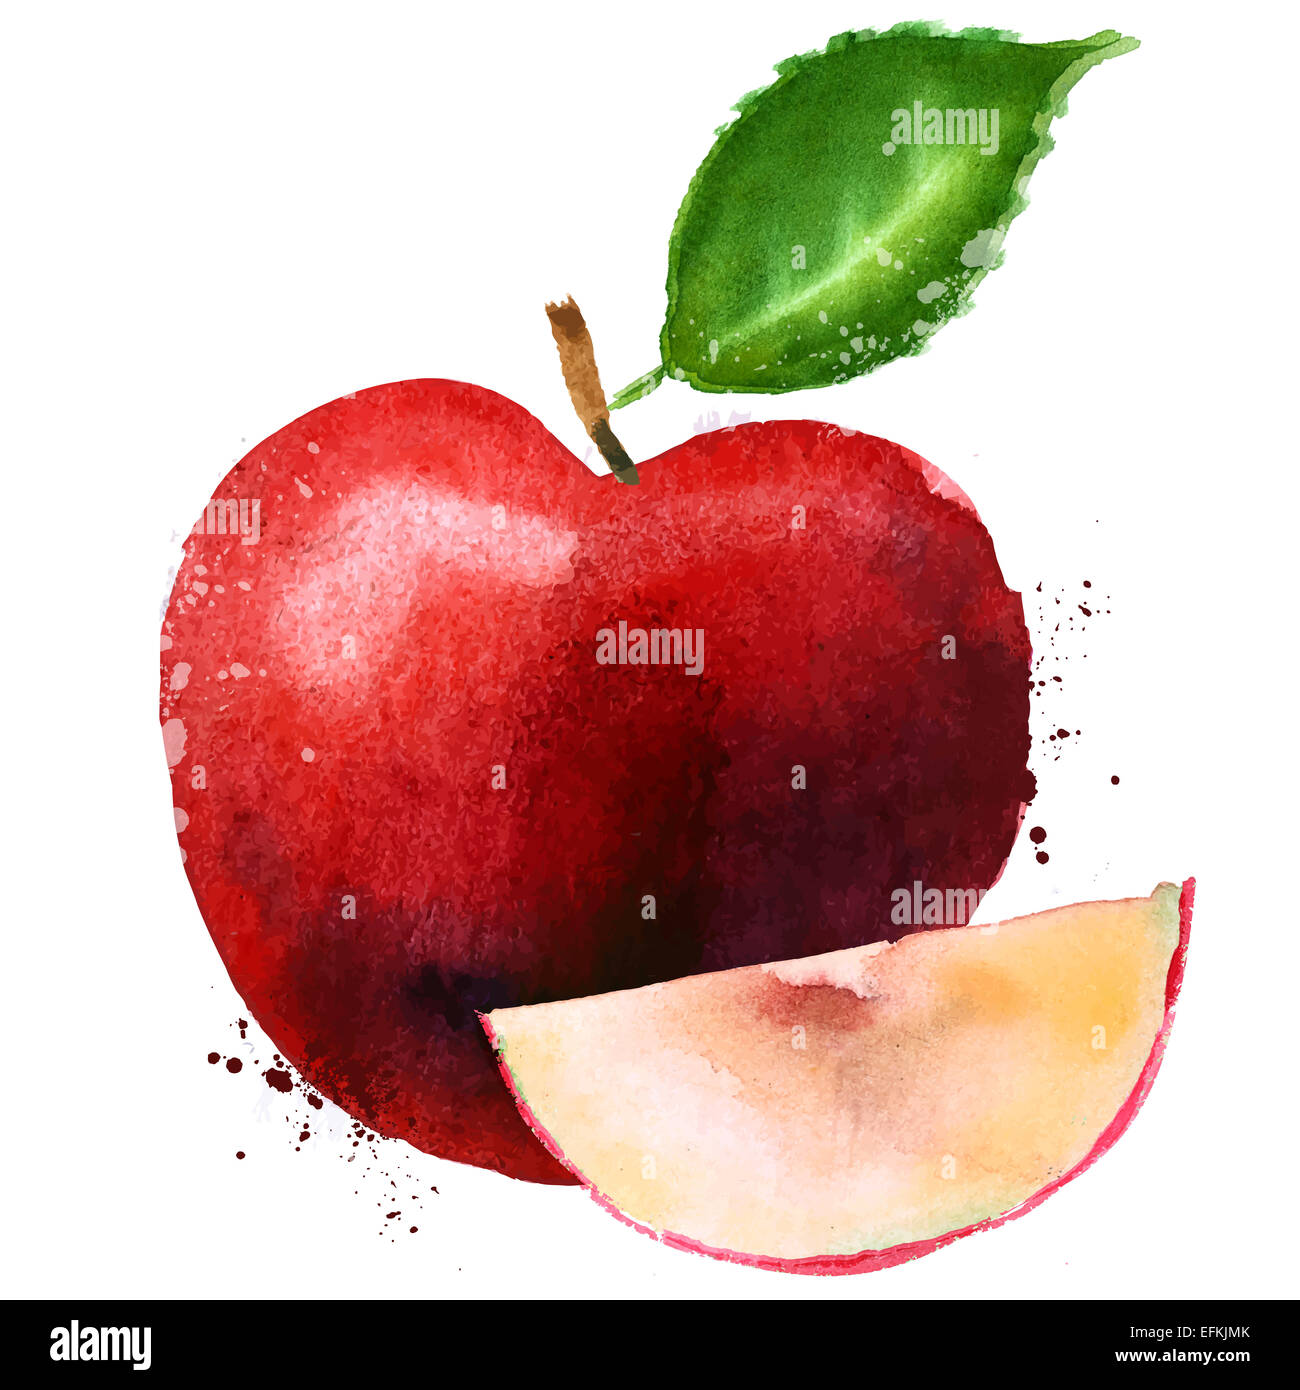 Red Apple vector logo design template. fruit or food icon. Stock Photo